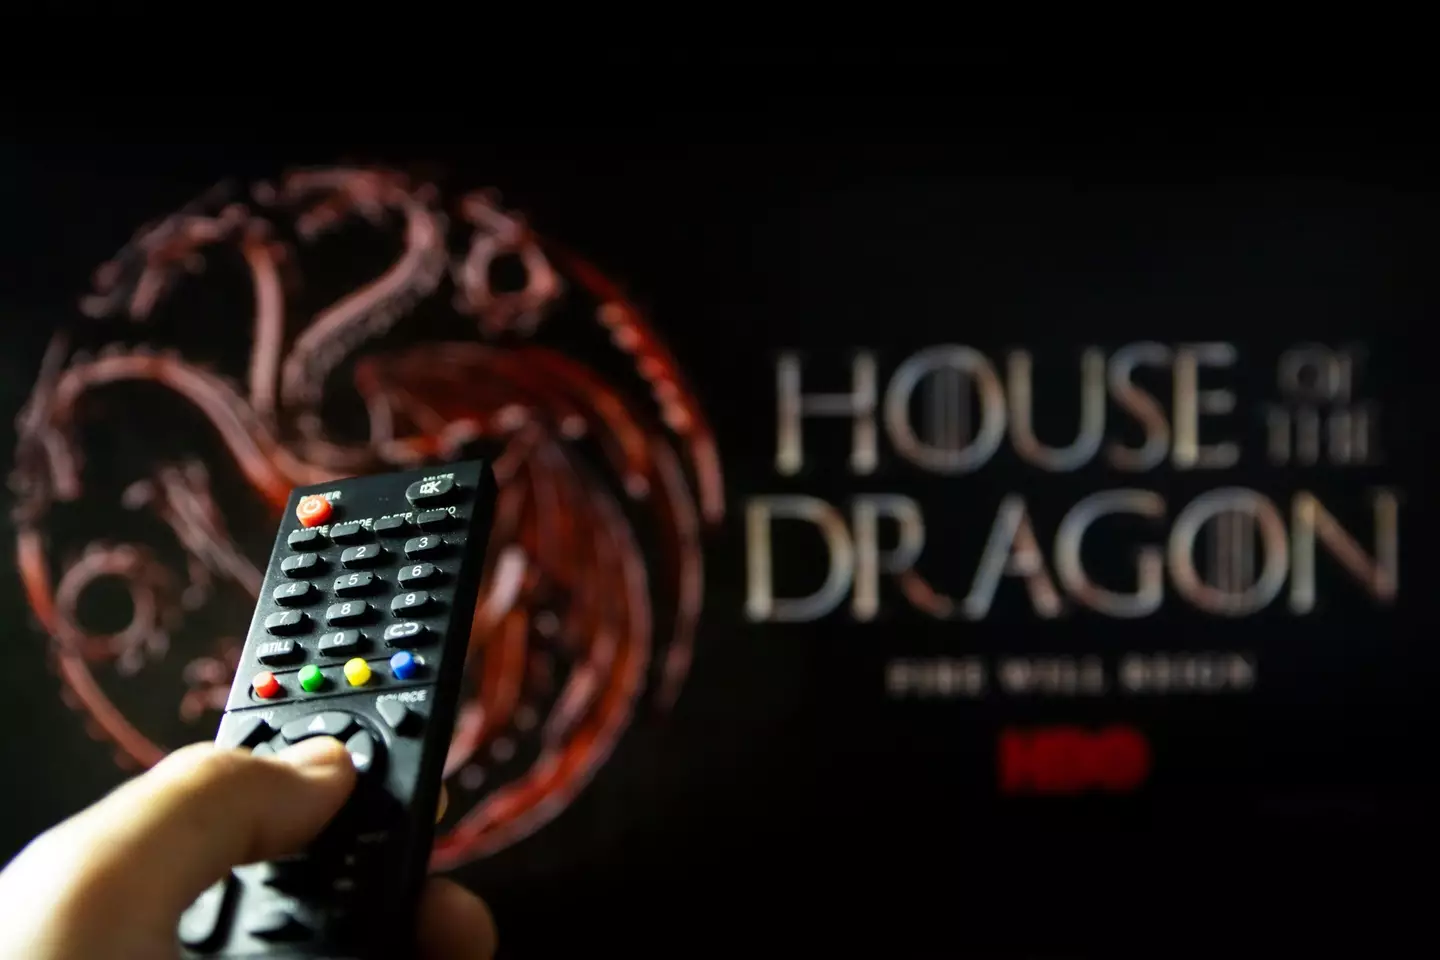 House of the Dragon will release later this month.